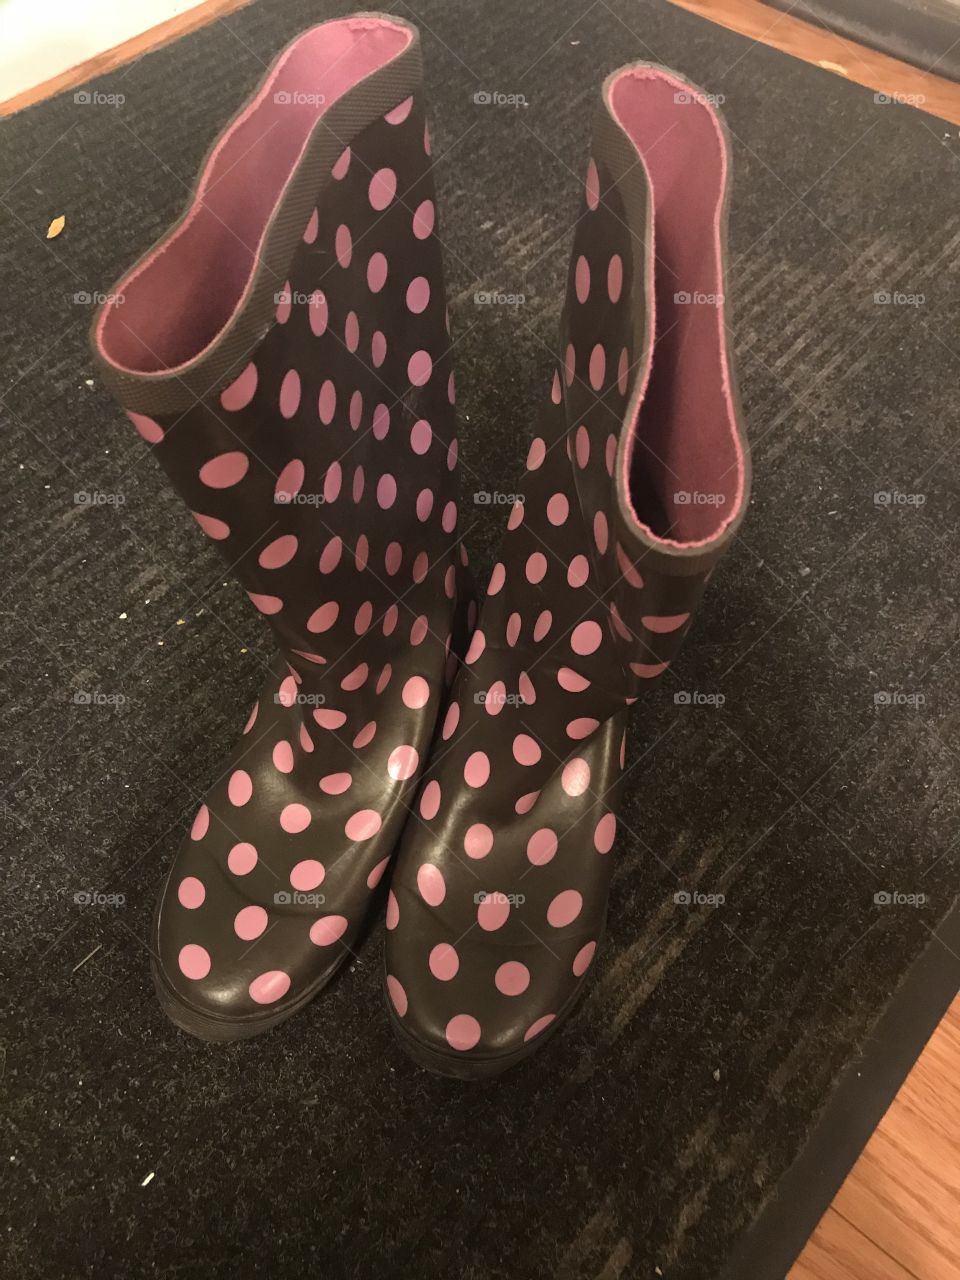 Children’s galoshes or boots